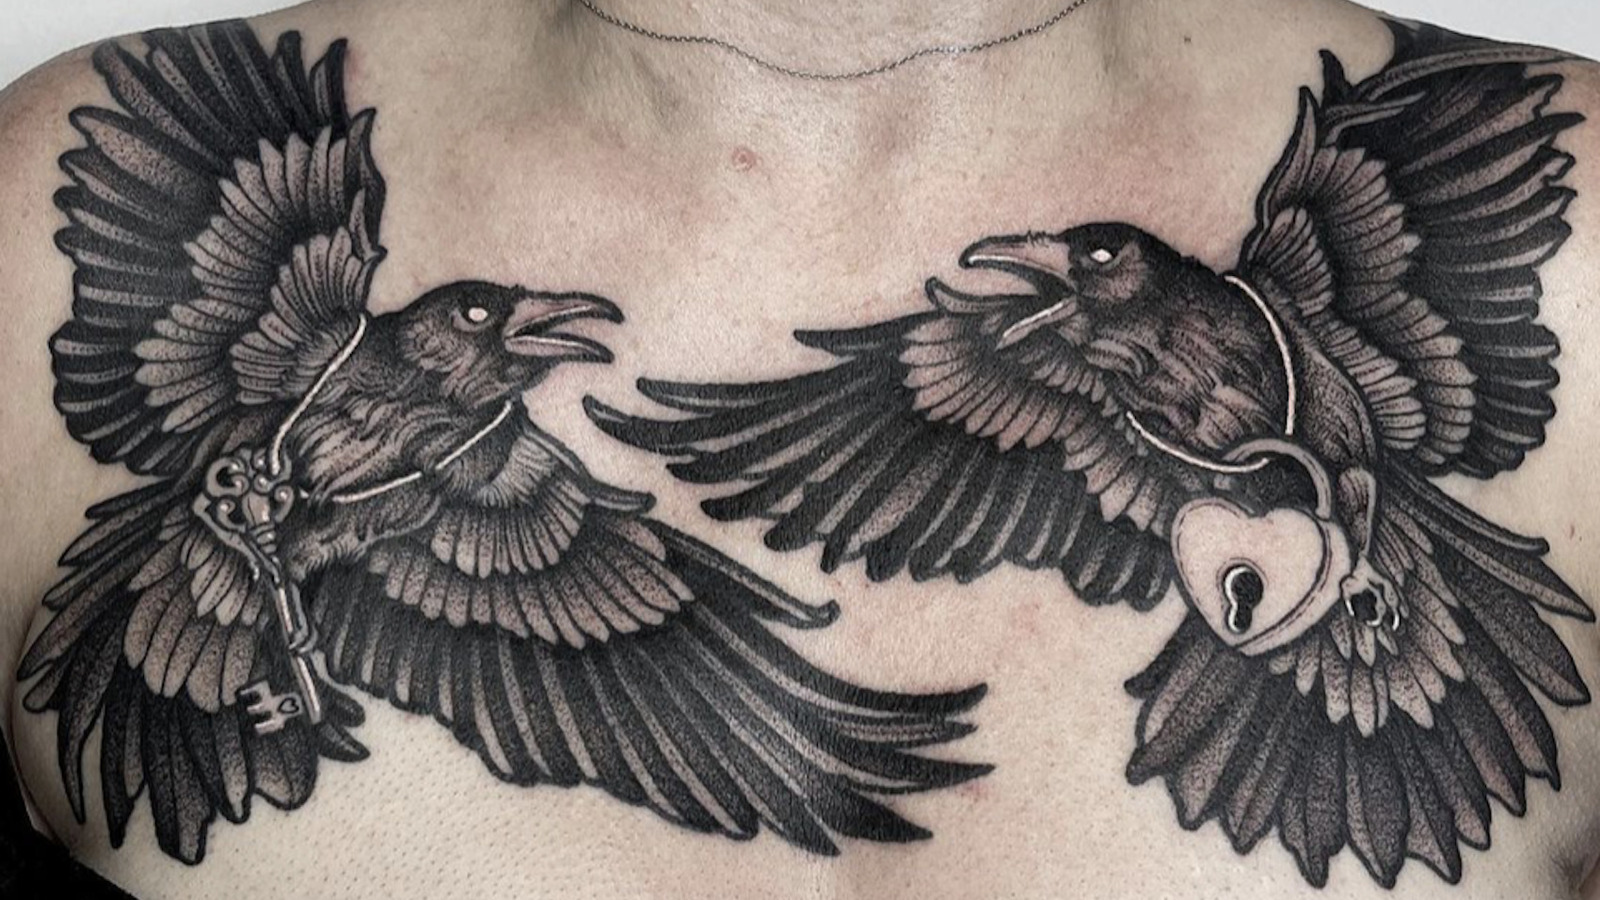 40 Traditional Crow Tattoo Designs For Men  Old School Birds  Crow tattoo  Crow tattoo design Tattoo designs men